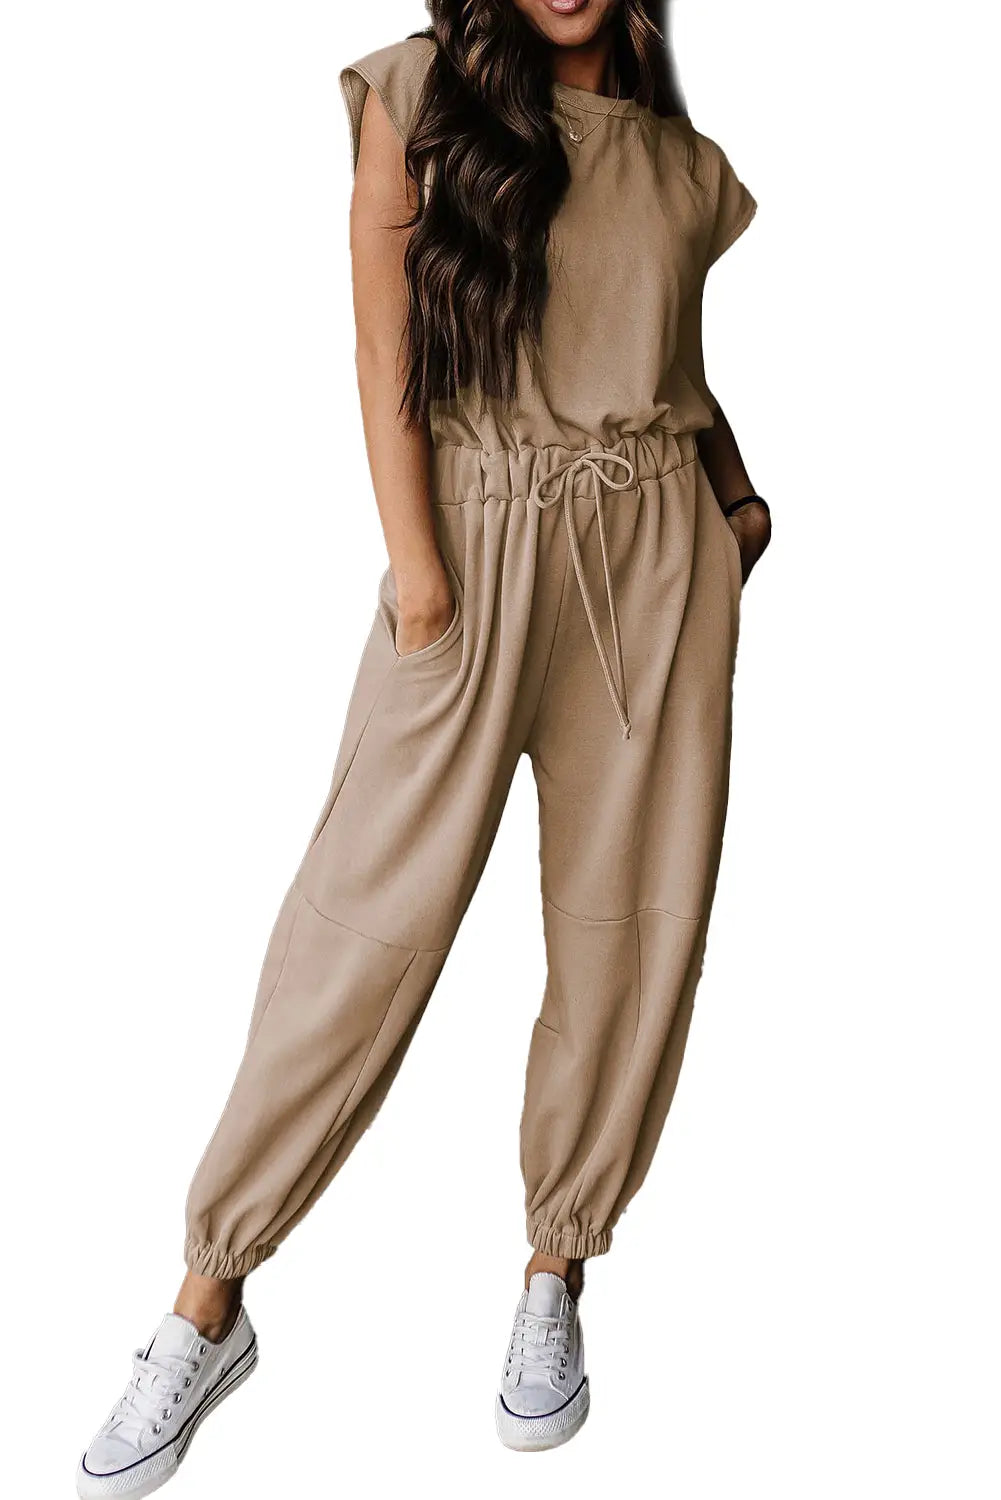 Light french beige cap sleeve open back drawstring jogger jumpsuit - jumpsuits & rompers